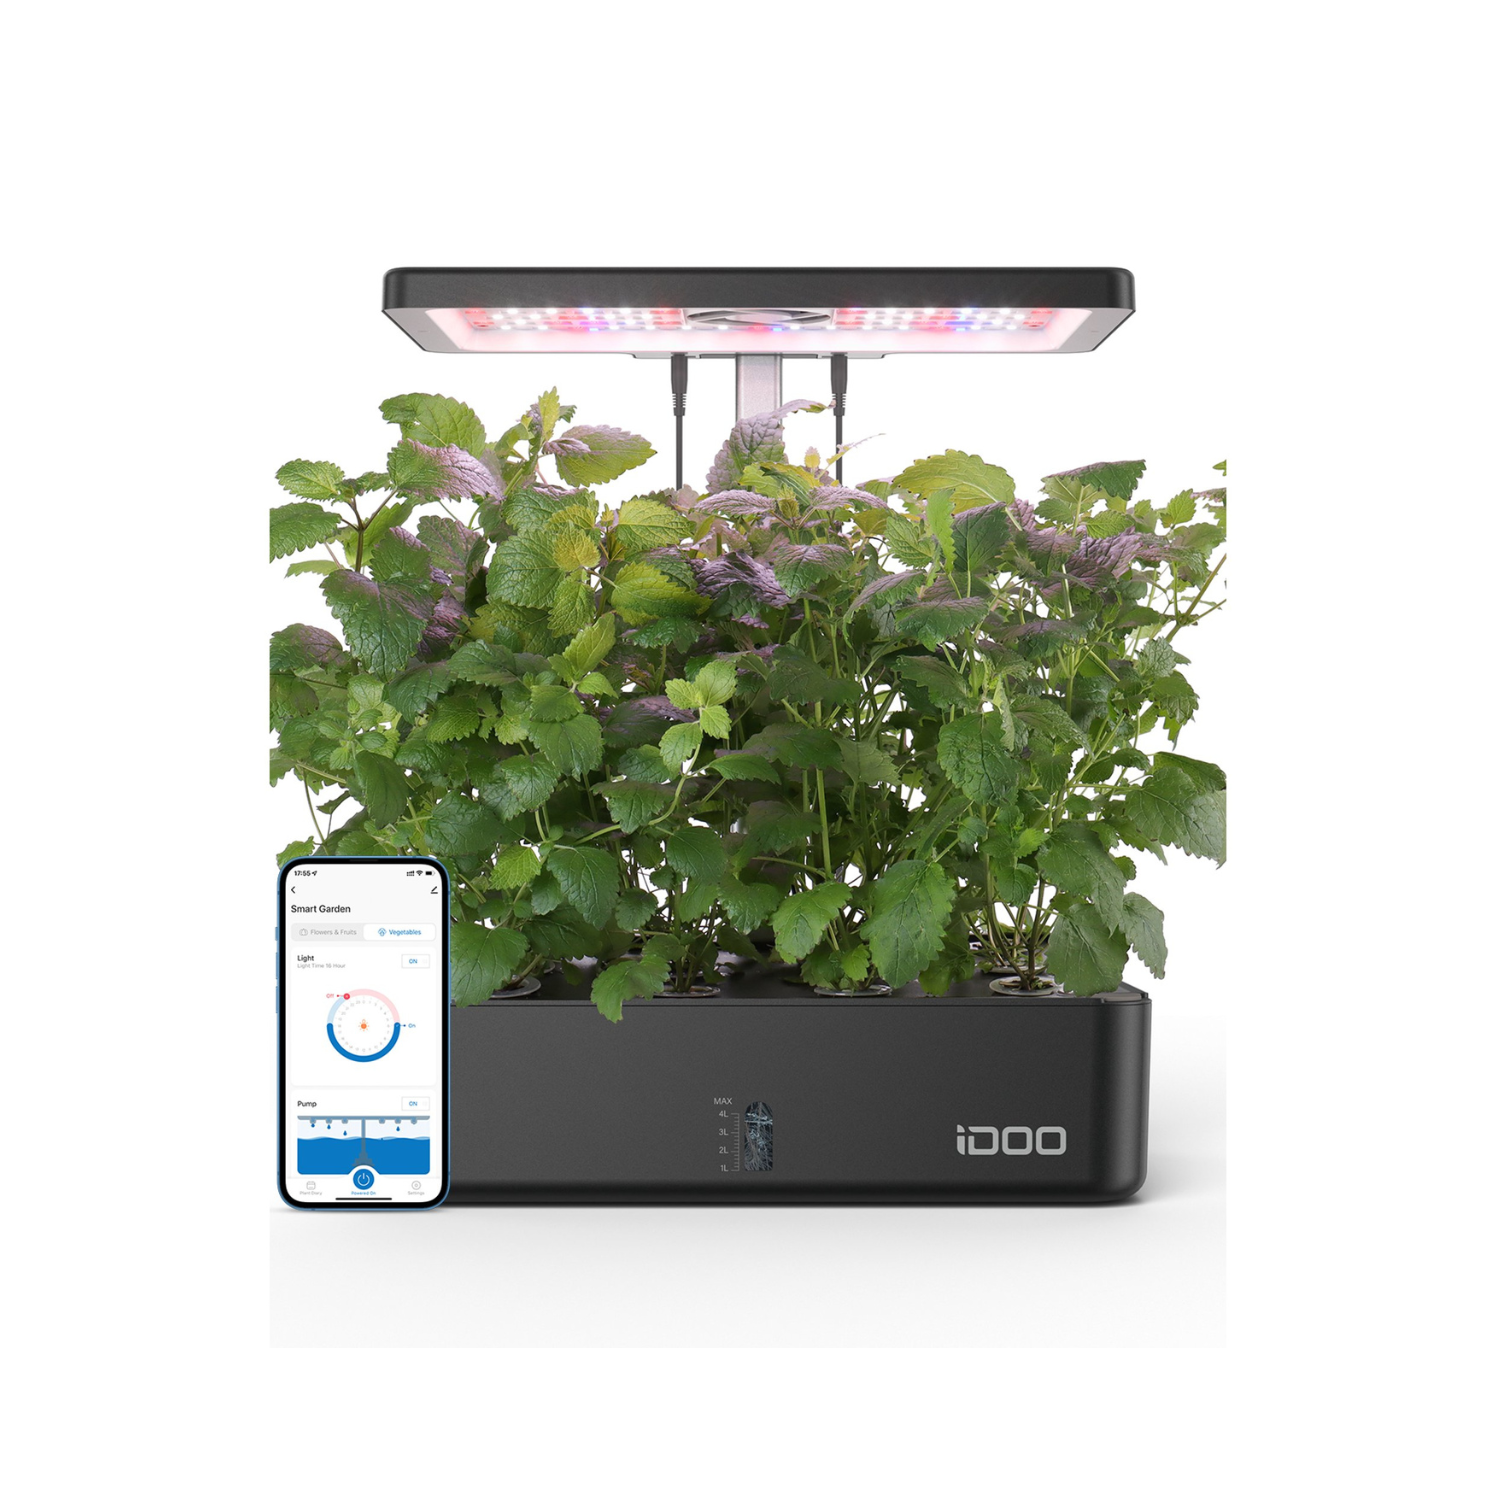 iDOO WiFi 12 Pods Hydroponics Growing System with APP Controlled, Indoor Garden for Home Kitchen Gardening - Hydroponic Growing System Hydroponic Growing Systems by idoo